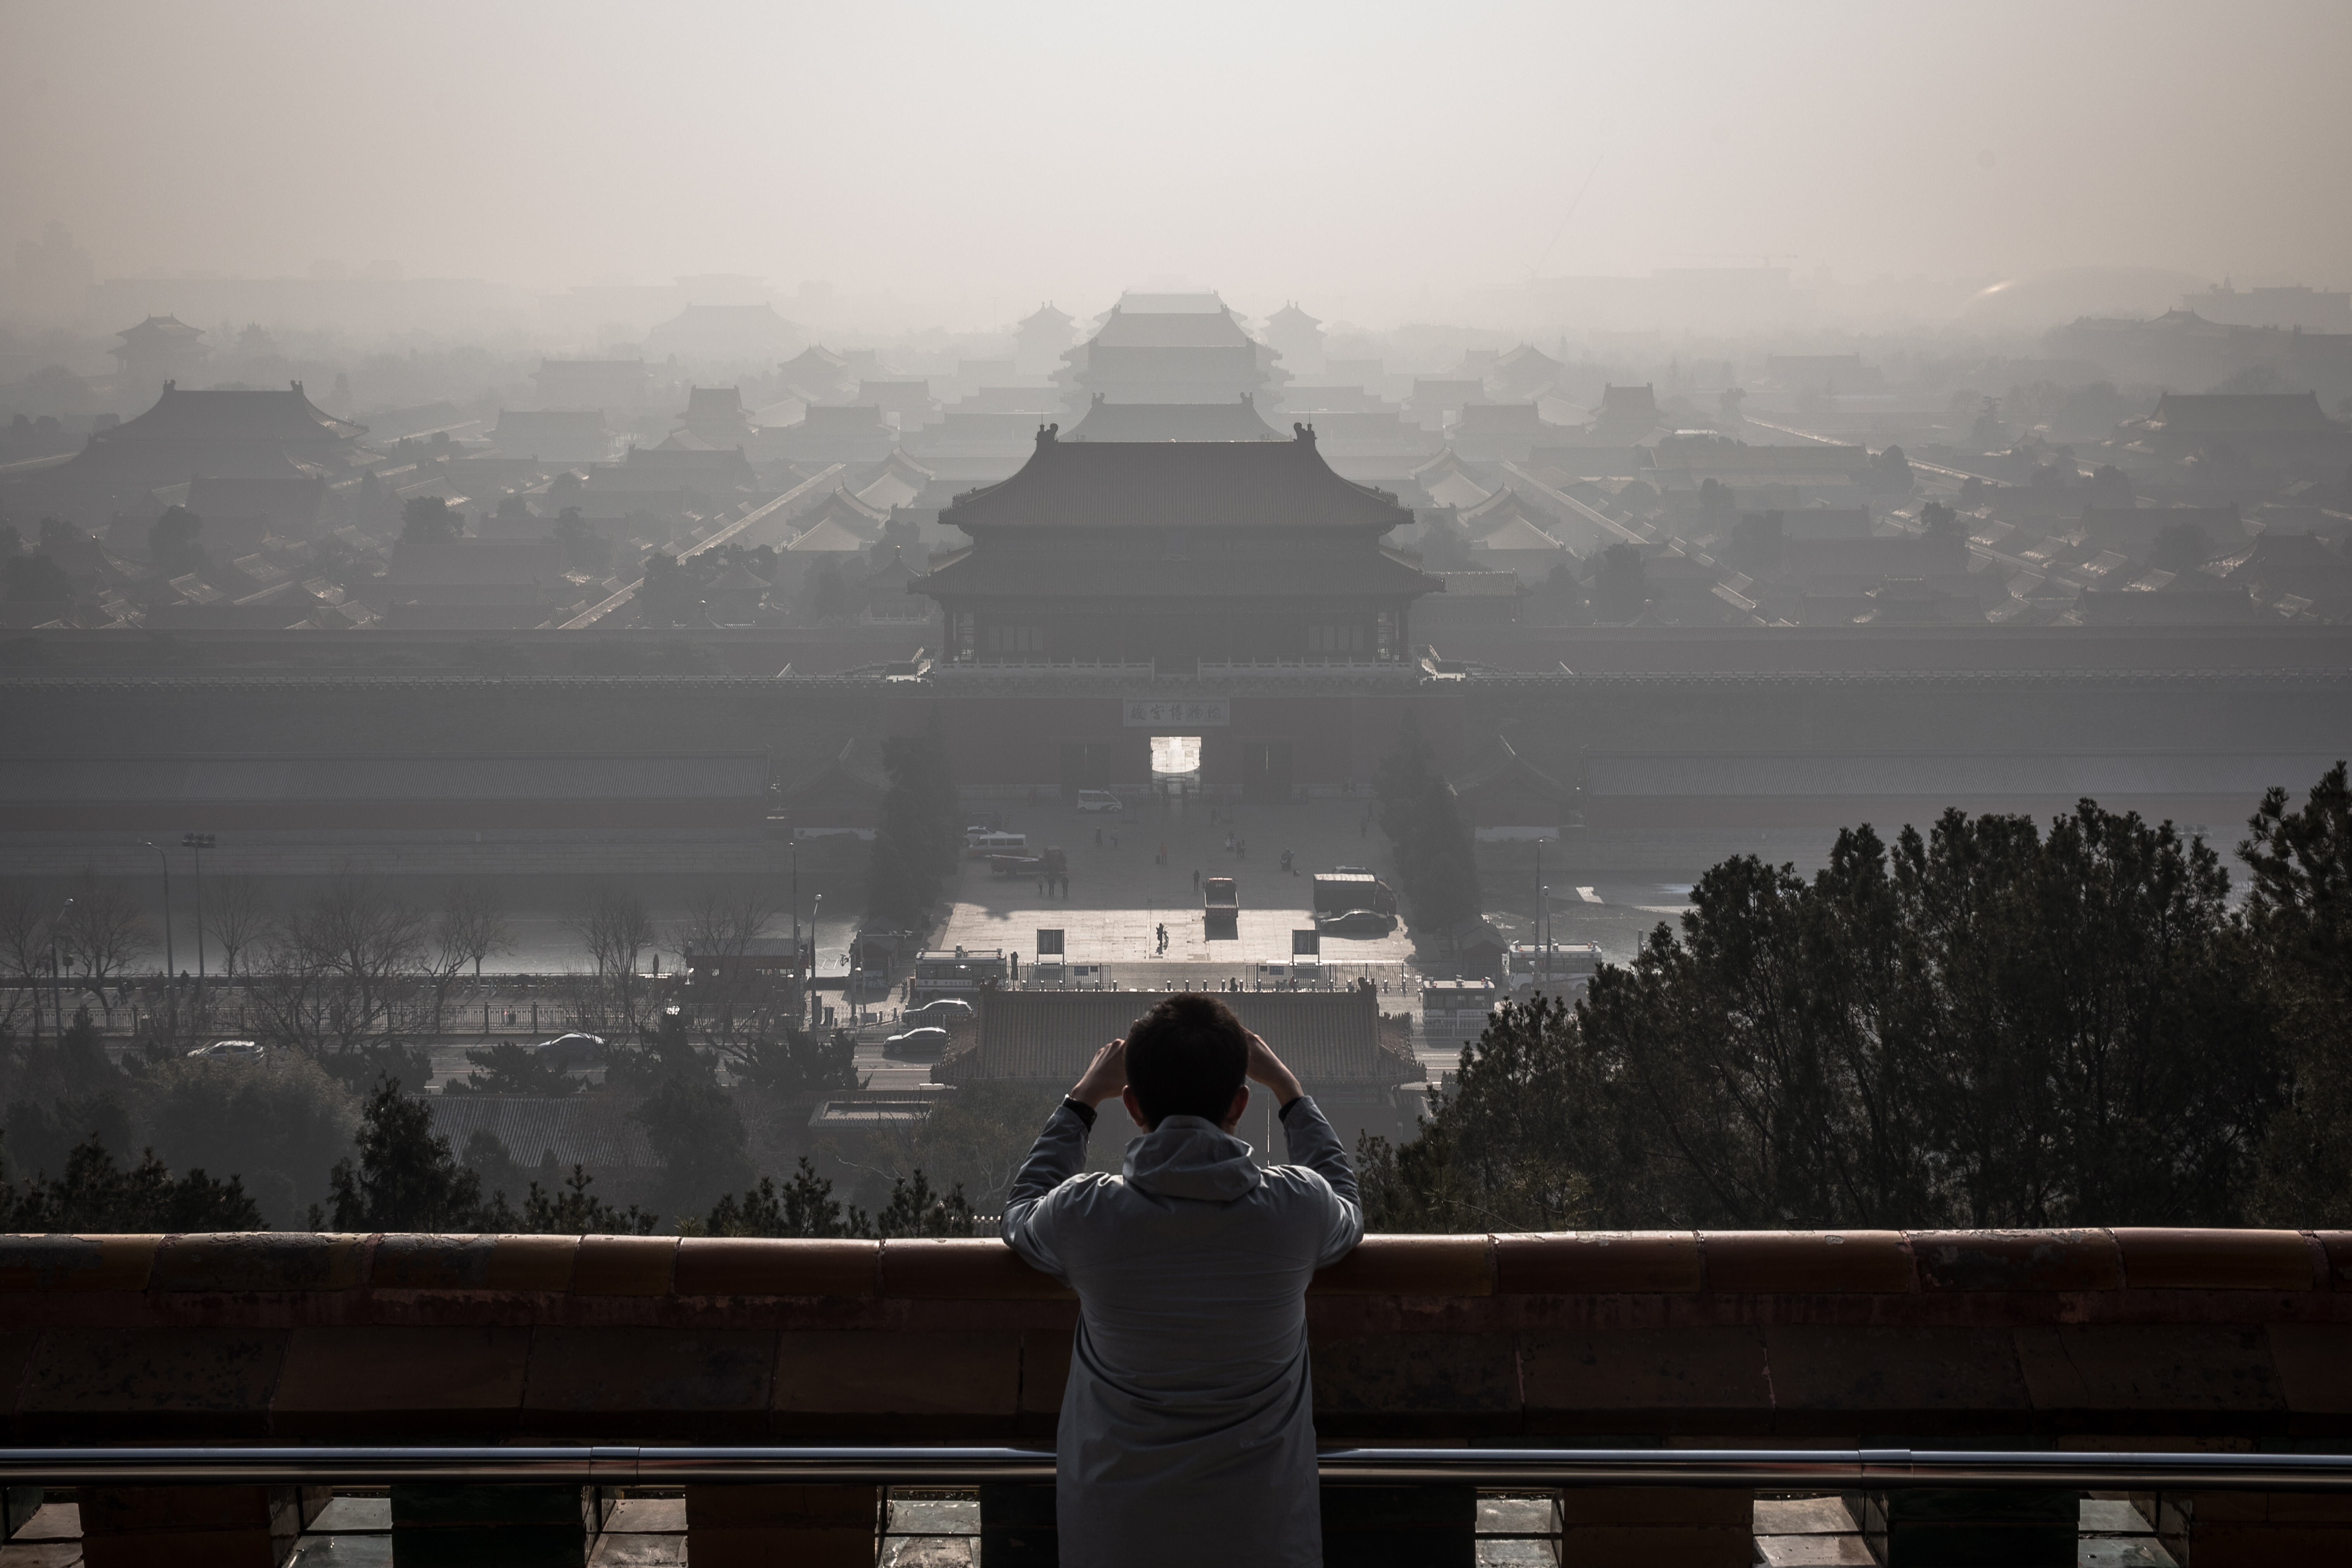 A man standing at a viewing area of Jingshan Park takes photos of the Forbidden City as a thick haze engulfs Beijing on December 9, 2019. China is hoping to establish itself as the new global leader in the fight against climate change, following the United States’ withdrawal from the Paris Agreement signed in 2015. Photo: EPA-EFE